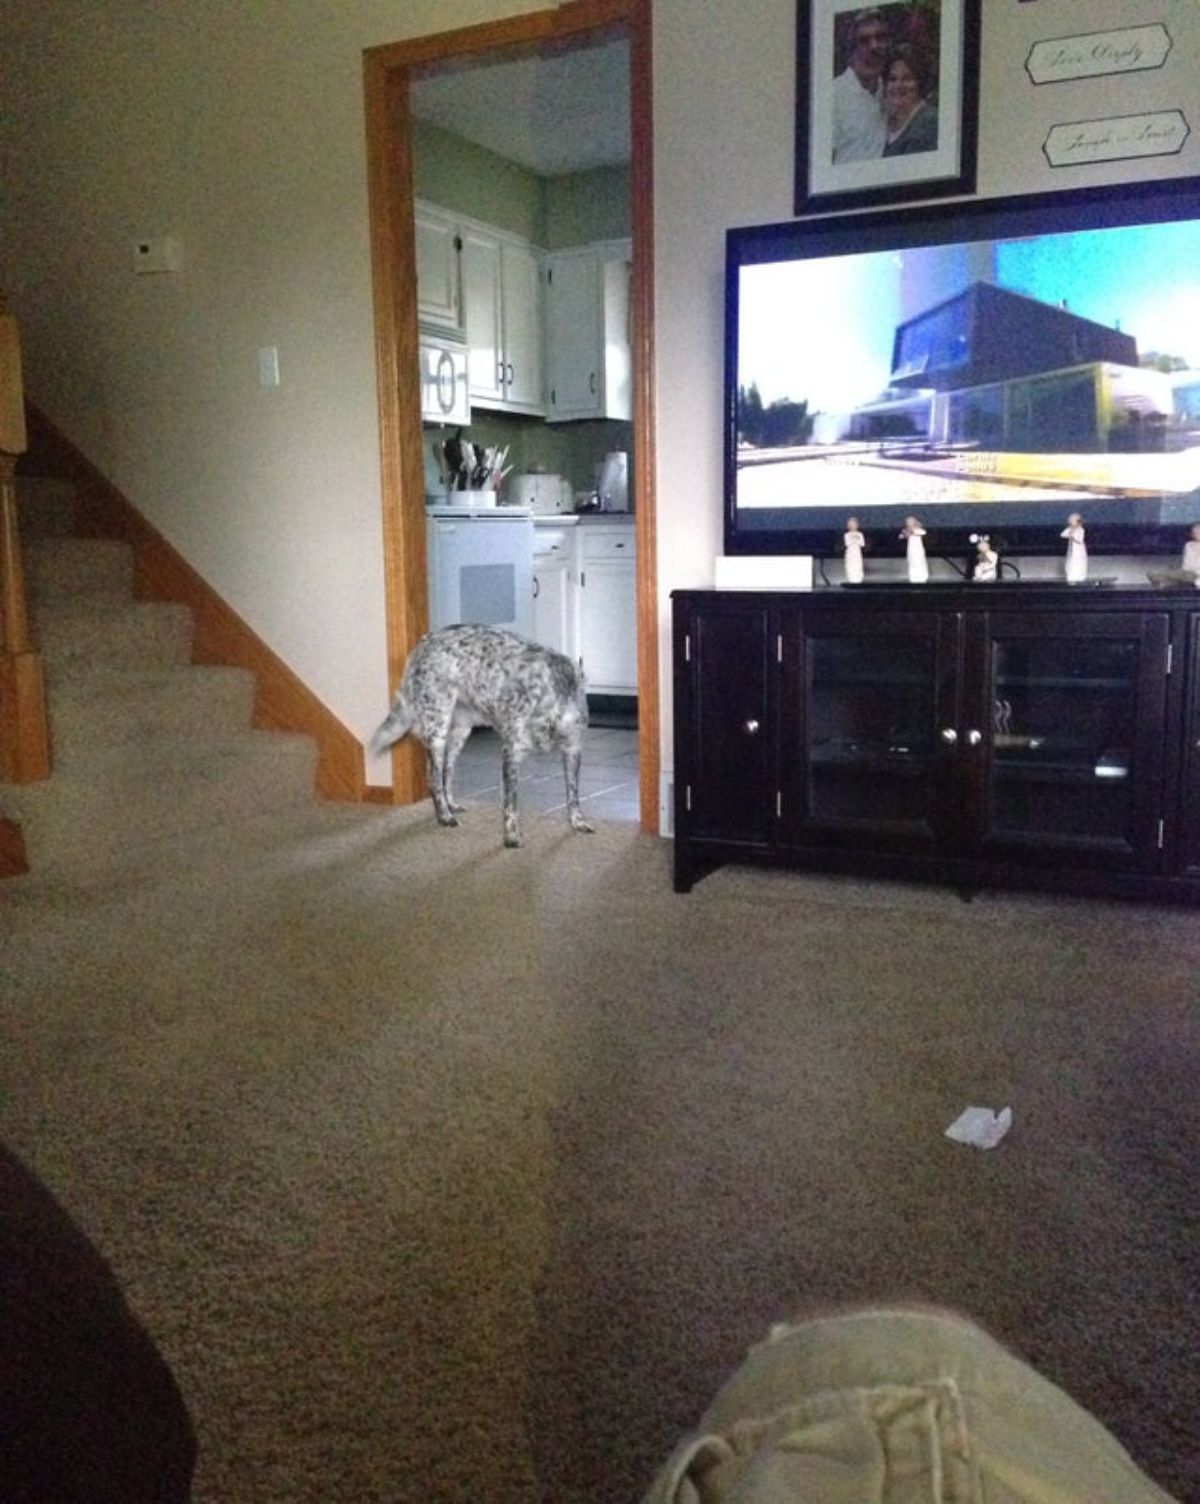 panoramic fail of black and white dog with no head standing at a kitchen doorway